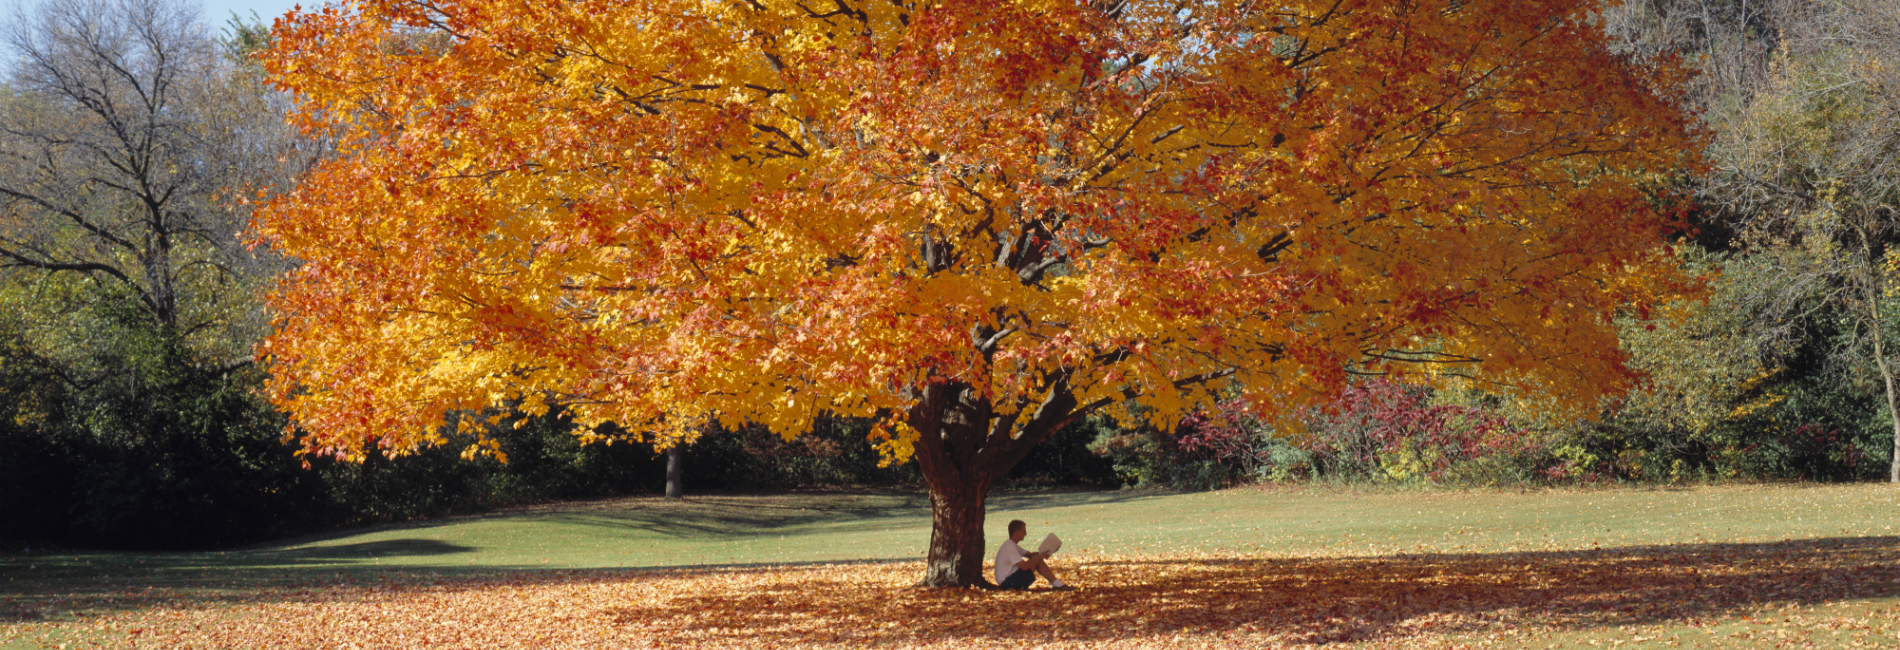 person sitting under tree in fall